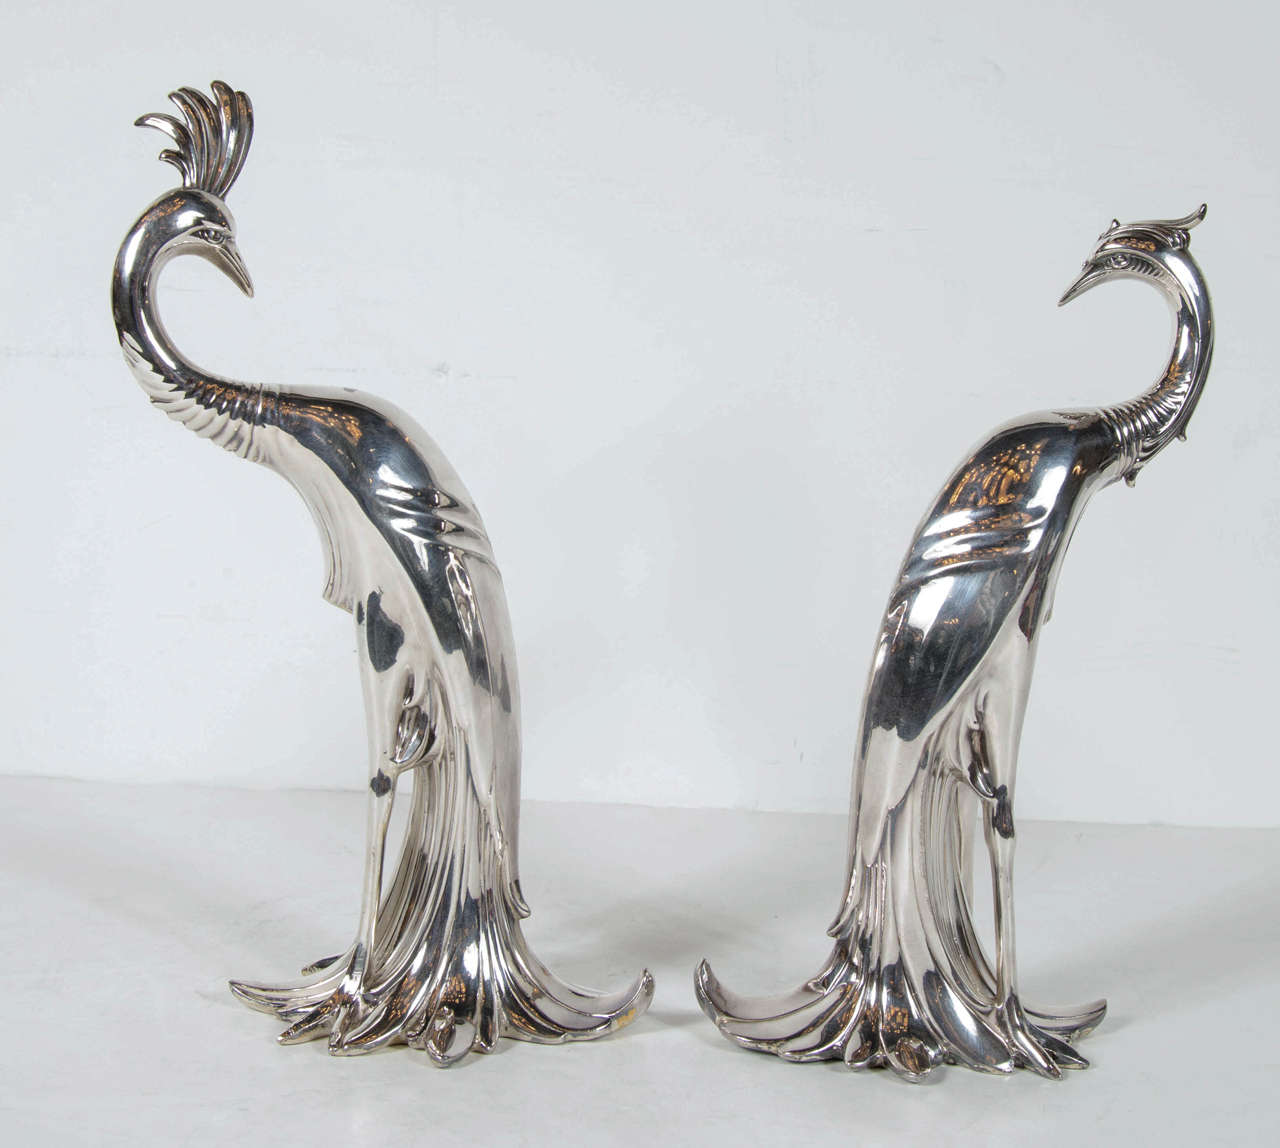 This stunning pair of Art Deco features a male peacock with its grand plumage and its head feathers it also has the companion female peacock as well. These are made by the W. B manufacturing company that made exquisite trophies in the 1920s and